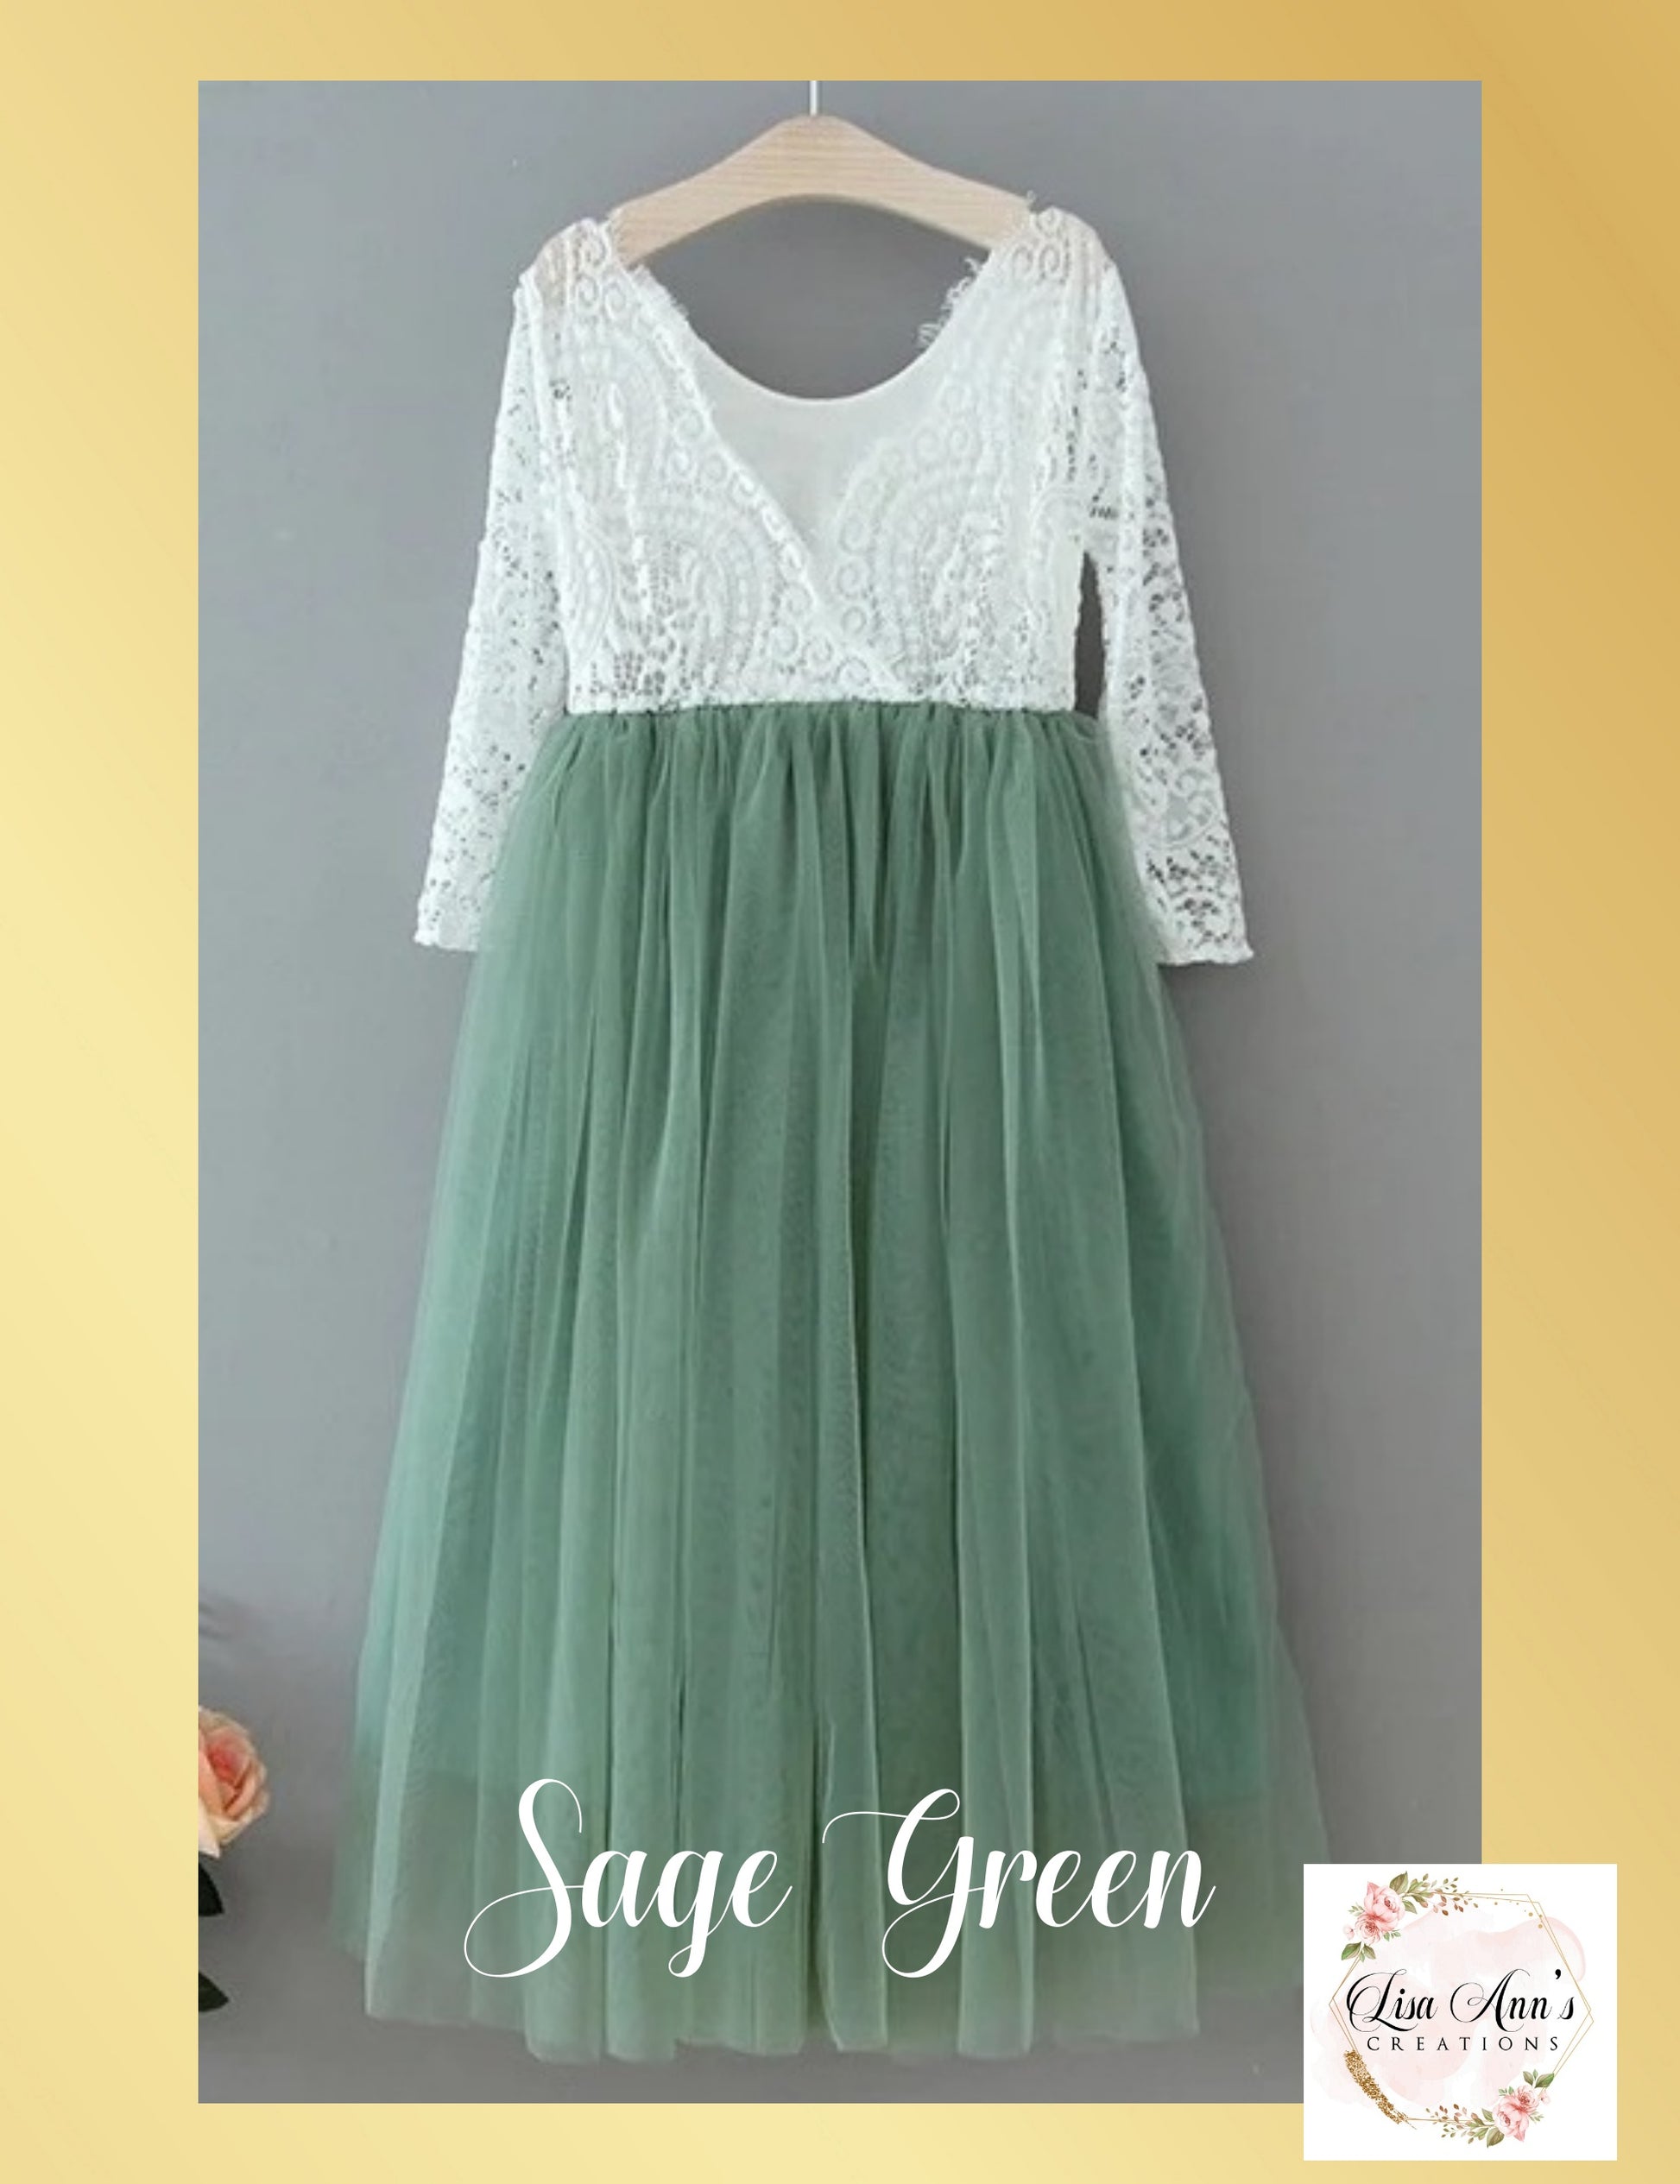 Sage Green Flower Girl dress in tulle and lace